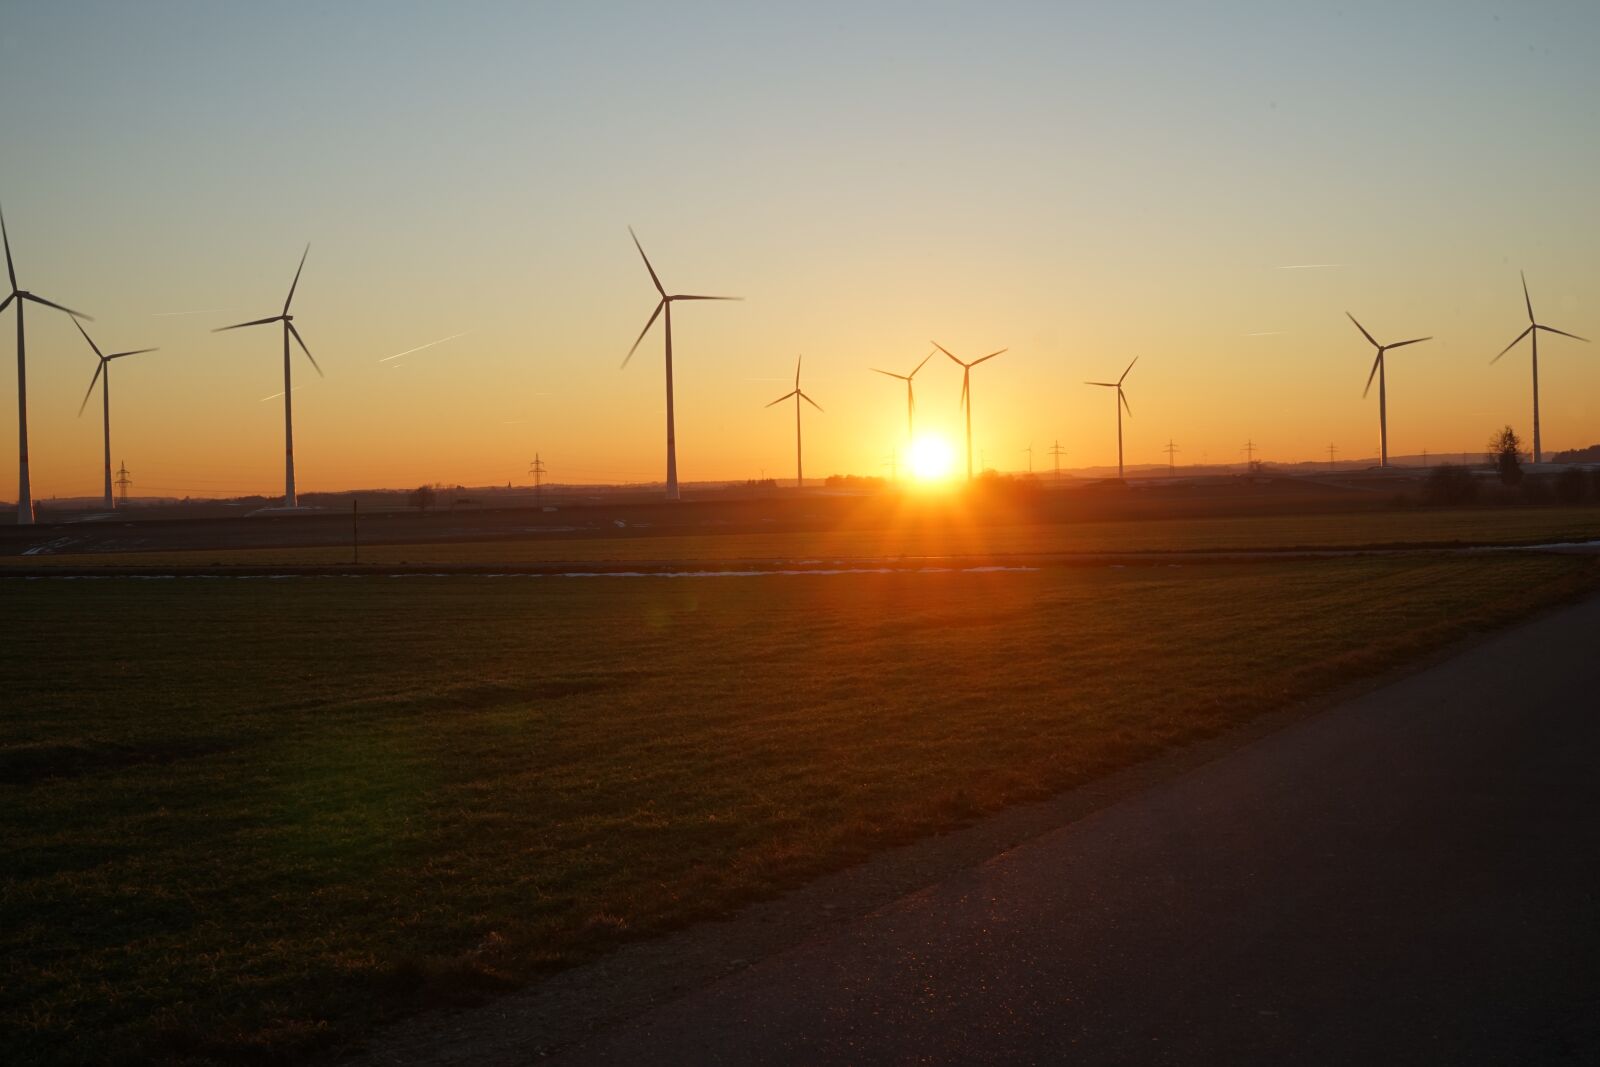 Sony a7 sample photo. Sunset, windmills, wind power photography